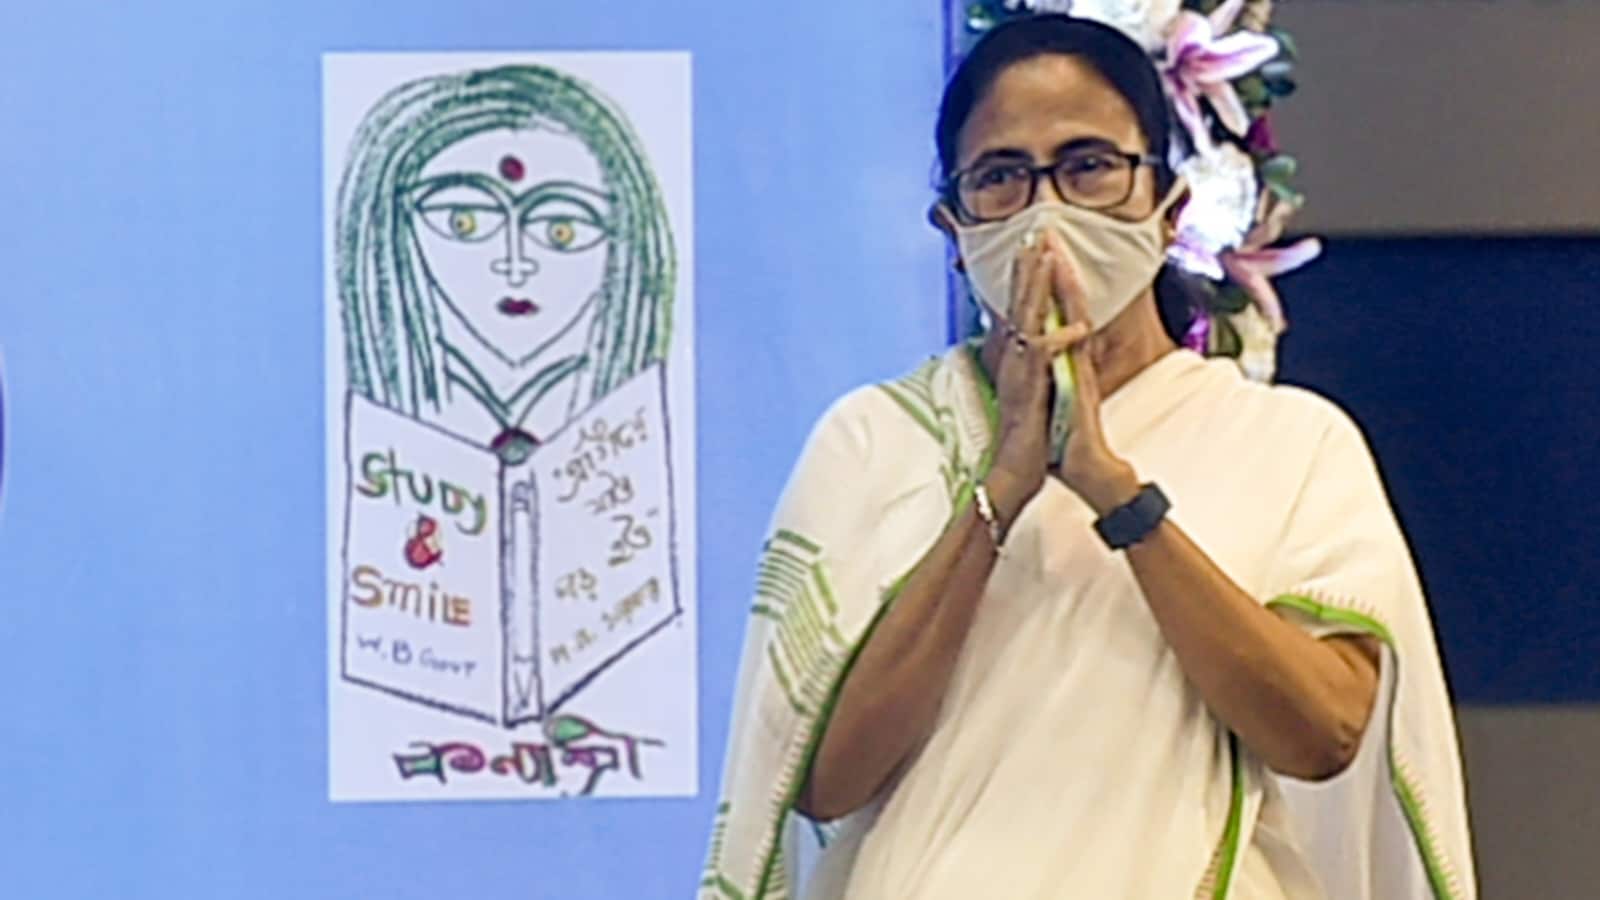 Two held for putting up posters with Mamata Banerjee's cartoon